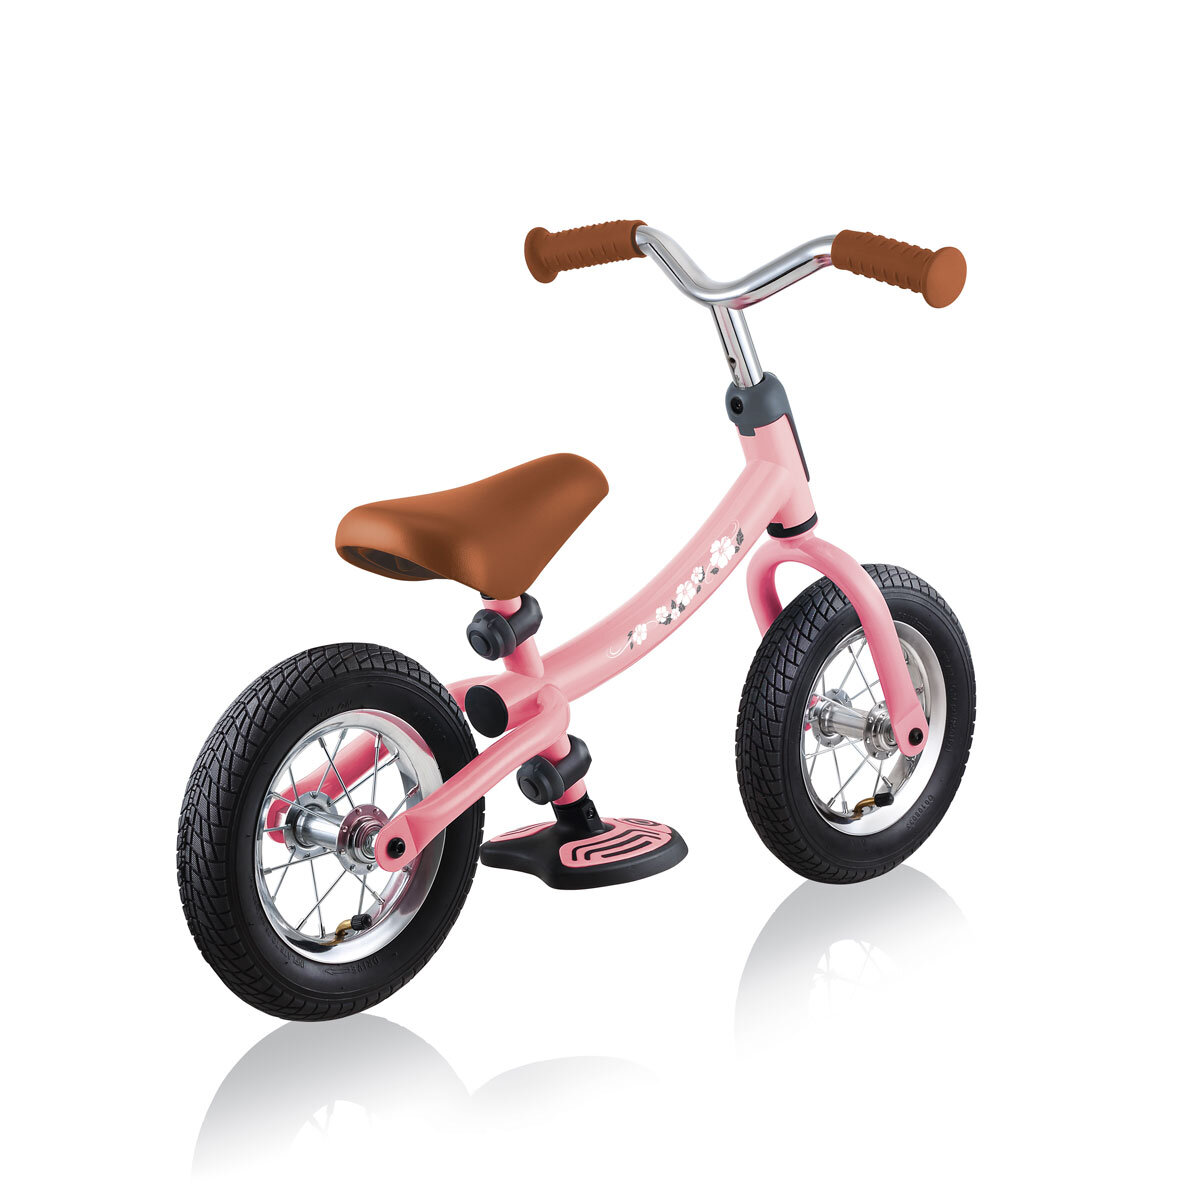 Buy Globber Go Bike Air Pastel Pink Overview7 Image at Costco.co.uk